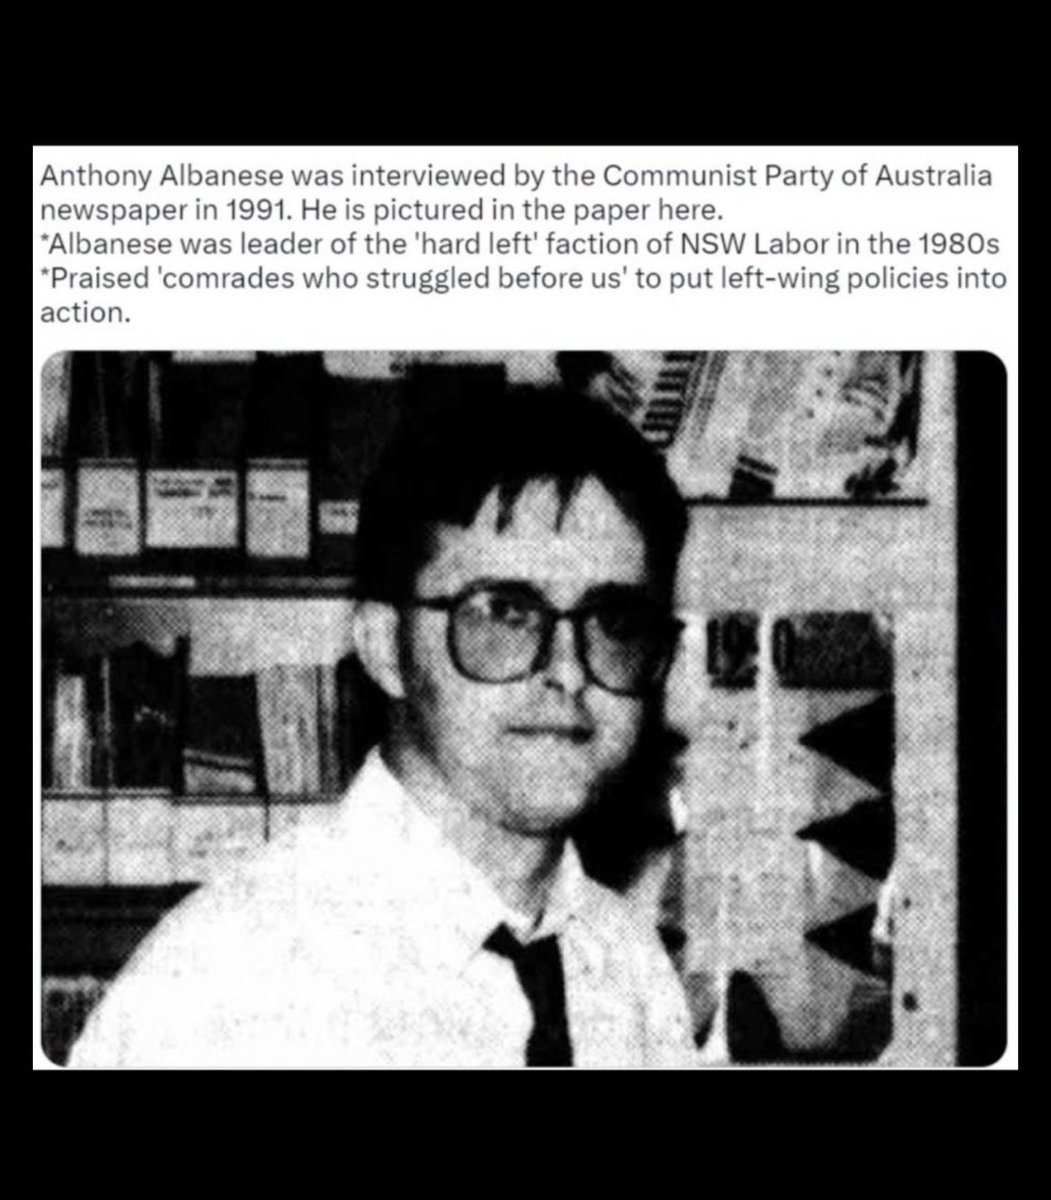 Back in 1991 the Communist Party of Australia newspaper considered Albo worthy of an interview.

Let that sink in.

#CommieBastard PM

#Auspol #LaborTrash Govt